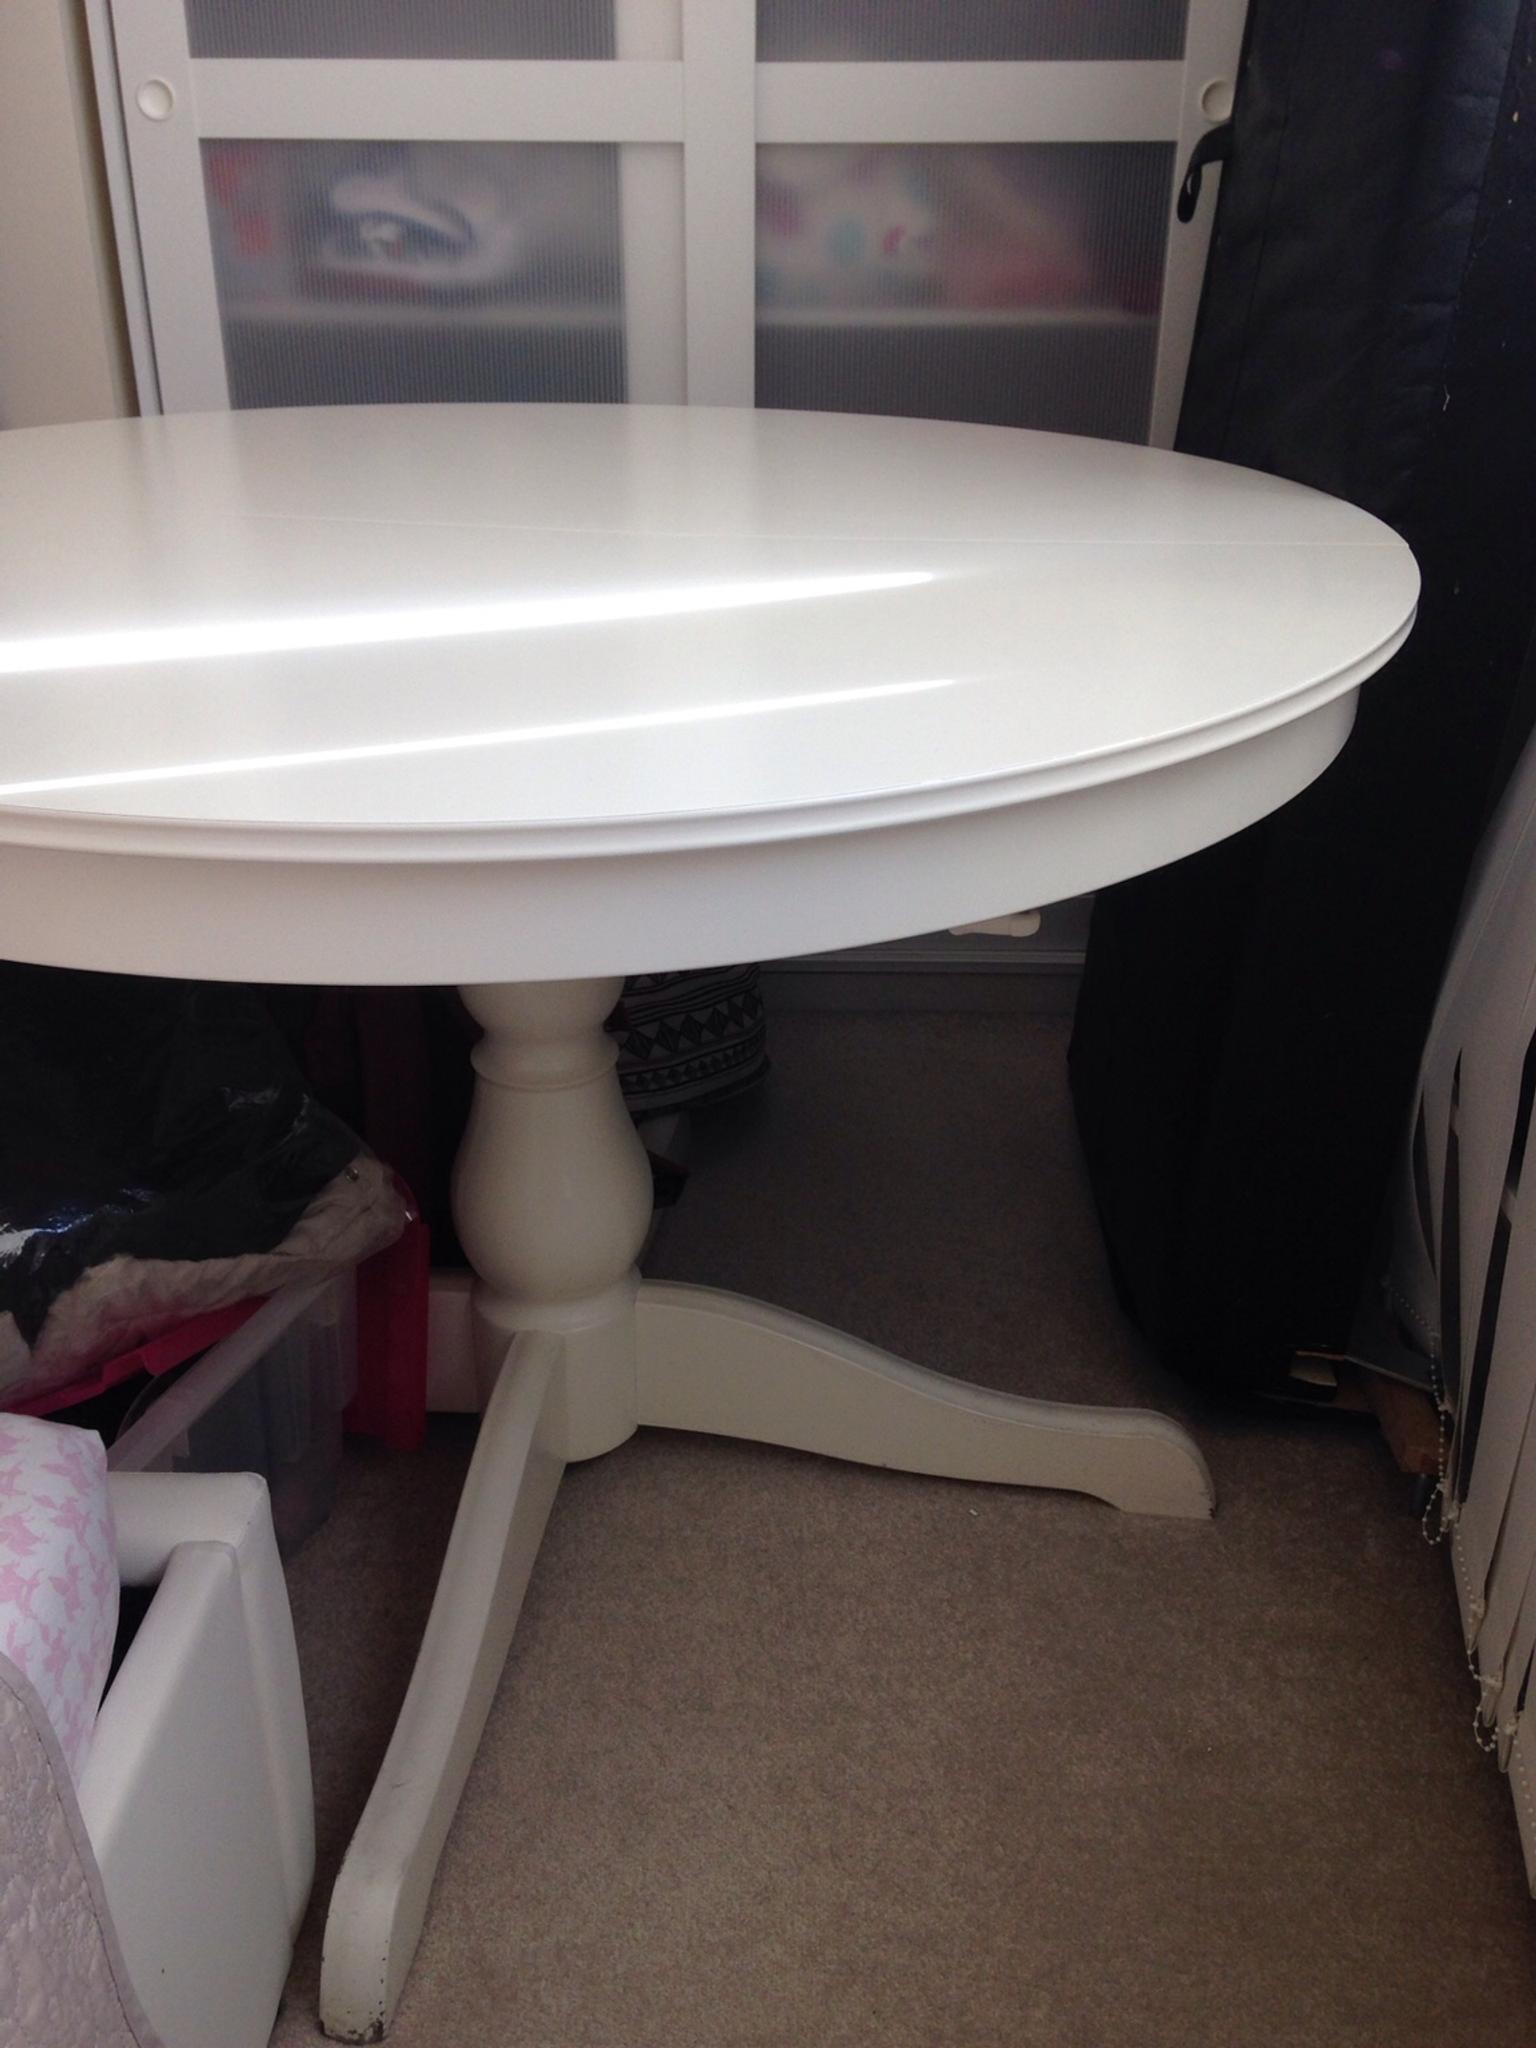 Ikea Ingatorp Extendable Round Table In E9 London For 100 00 For Sale Shpock